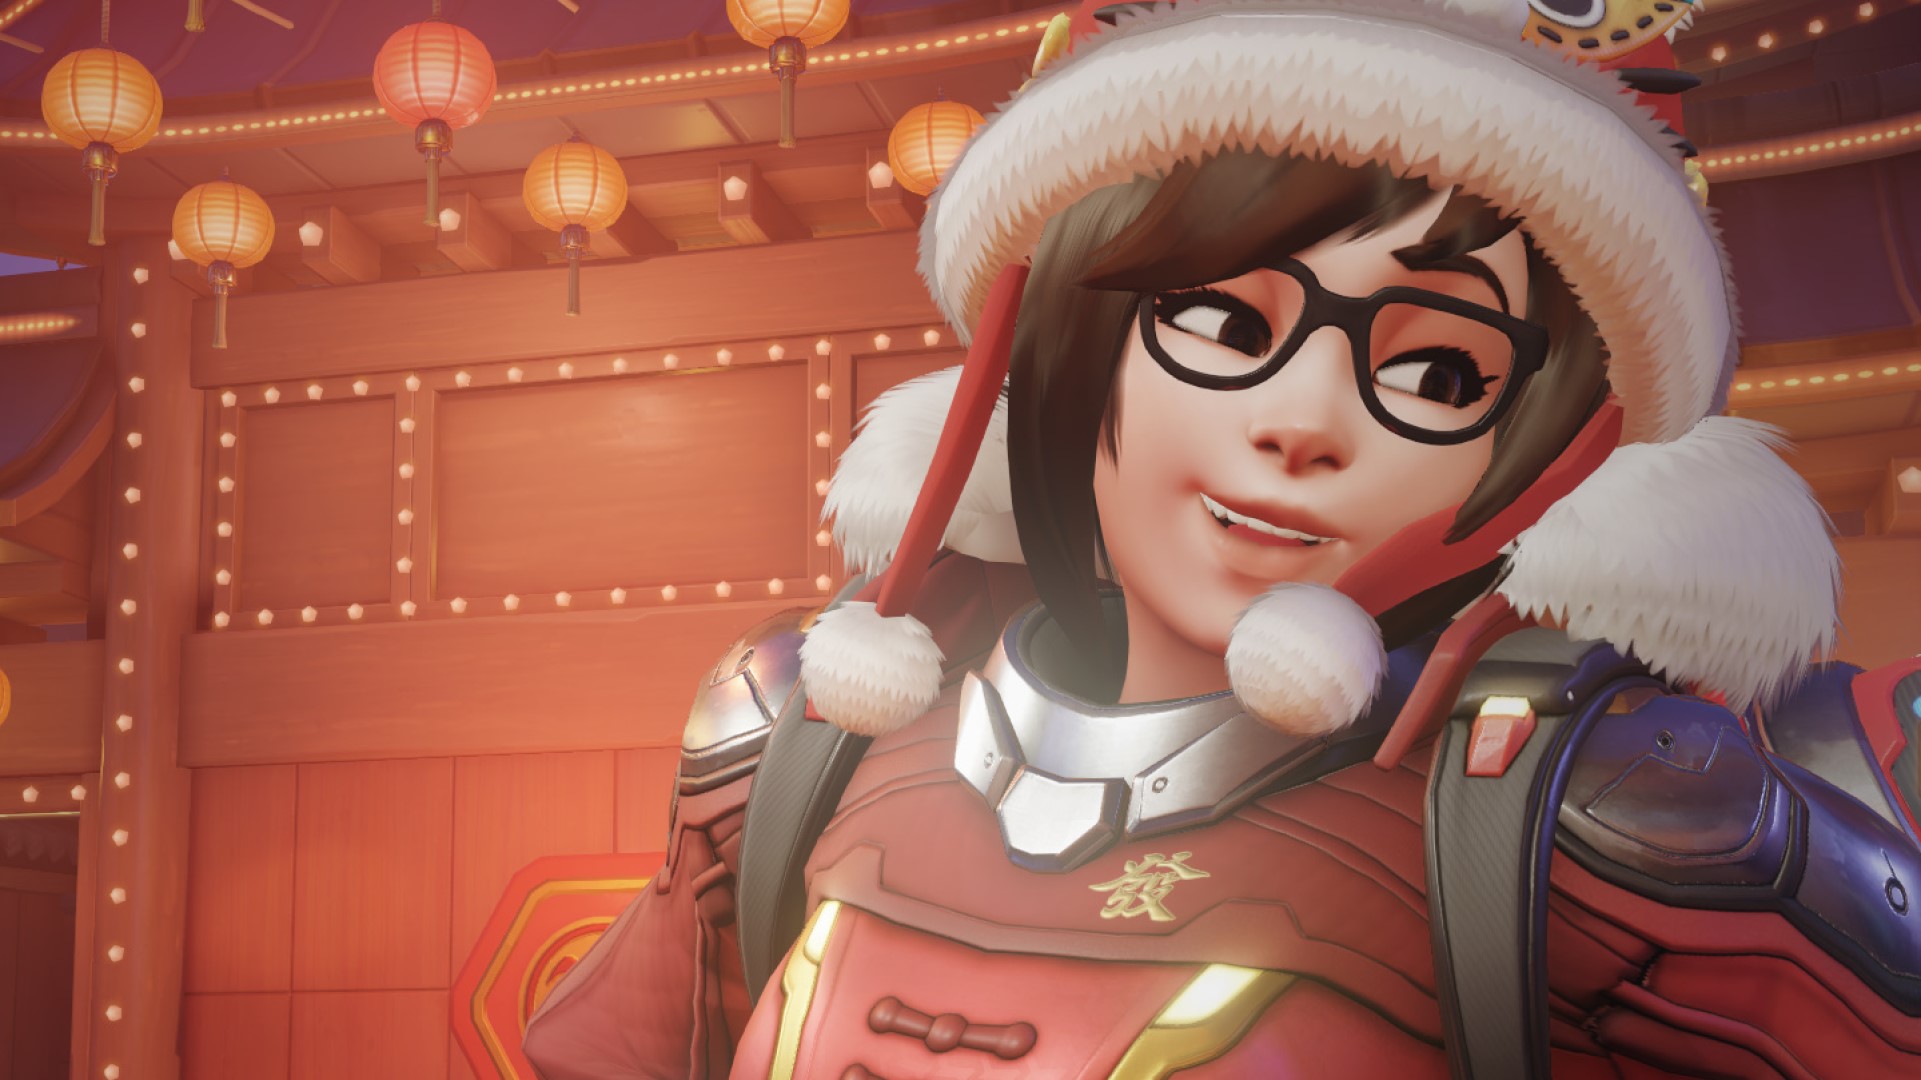 Overwatch 2 Lunar New Year adds CTF and Bounty Hunt, but few new skins